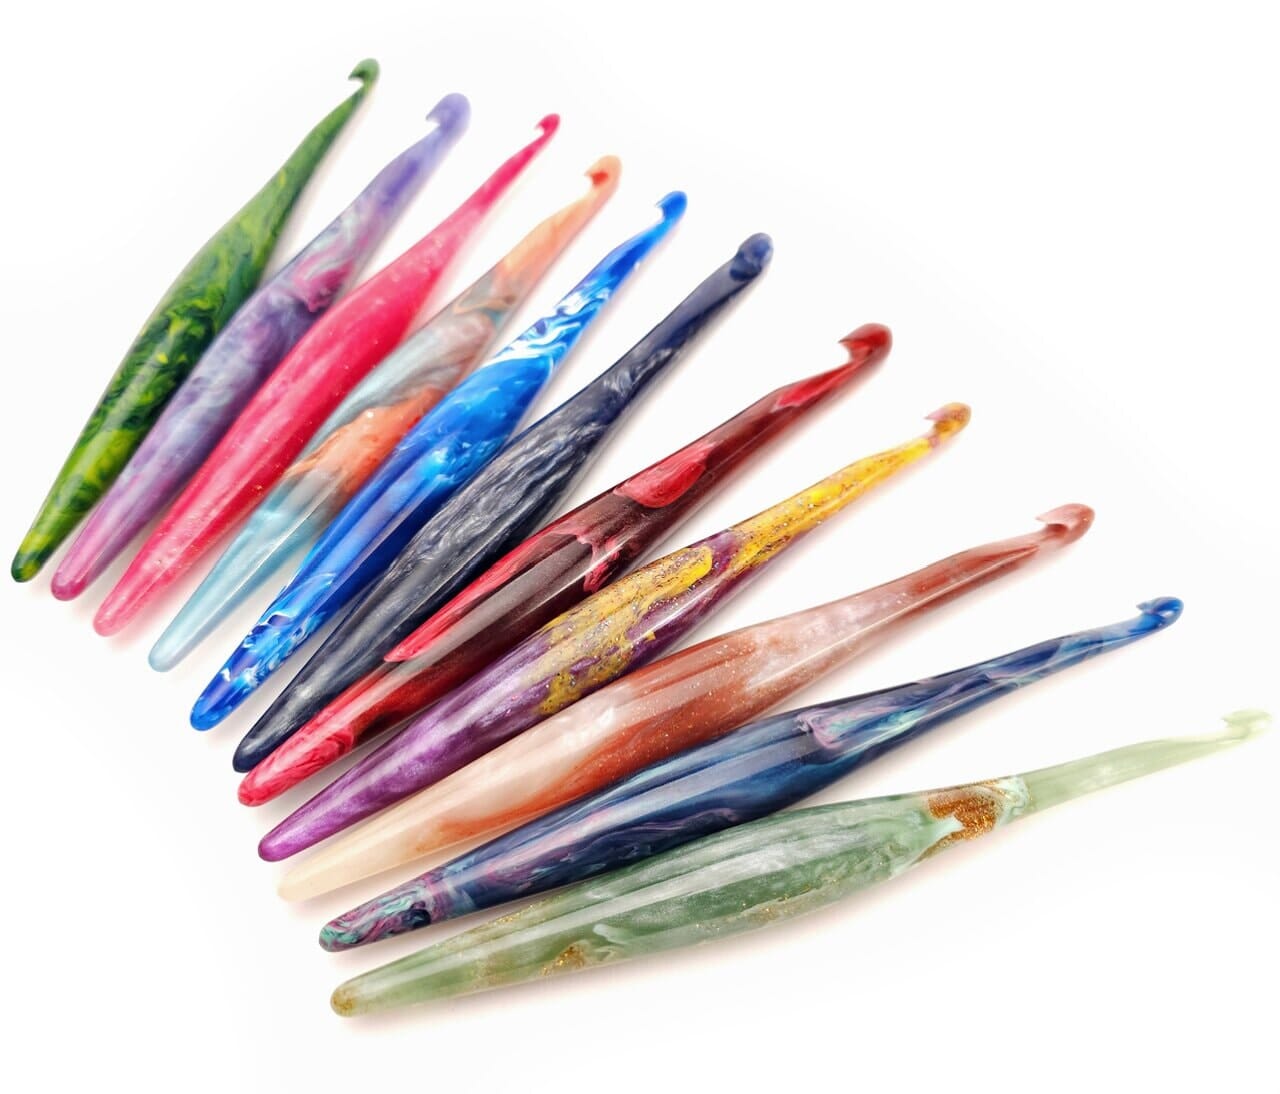 Candy Shop Crochet Hooks: Choose from Sizes F, G, H and I – FurlsCrochet